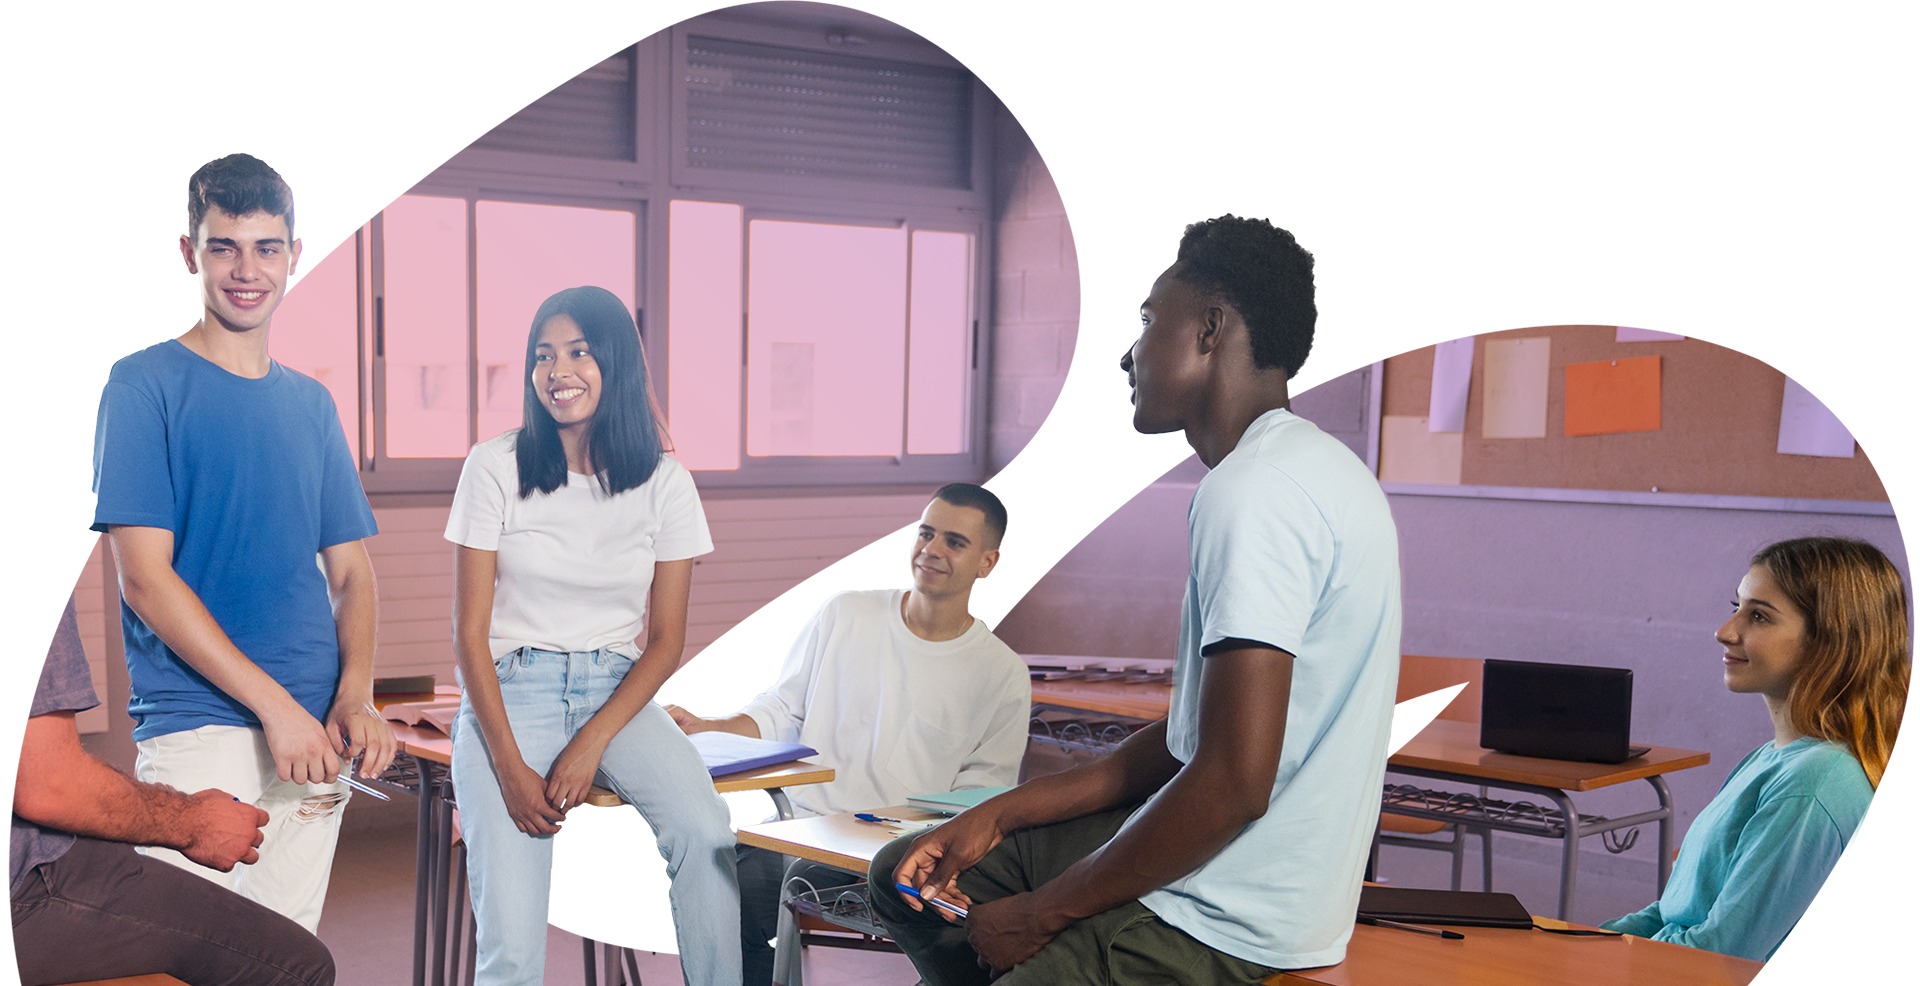 Five high school students gathered in front of their instructor at desks. One student is standing, while the others are more casually seated.